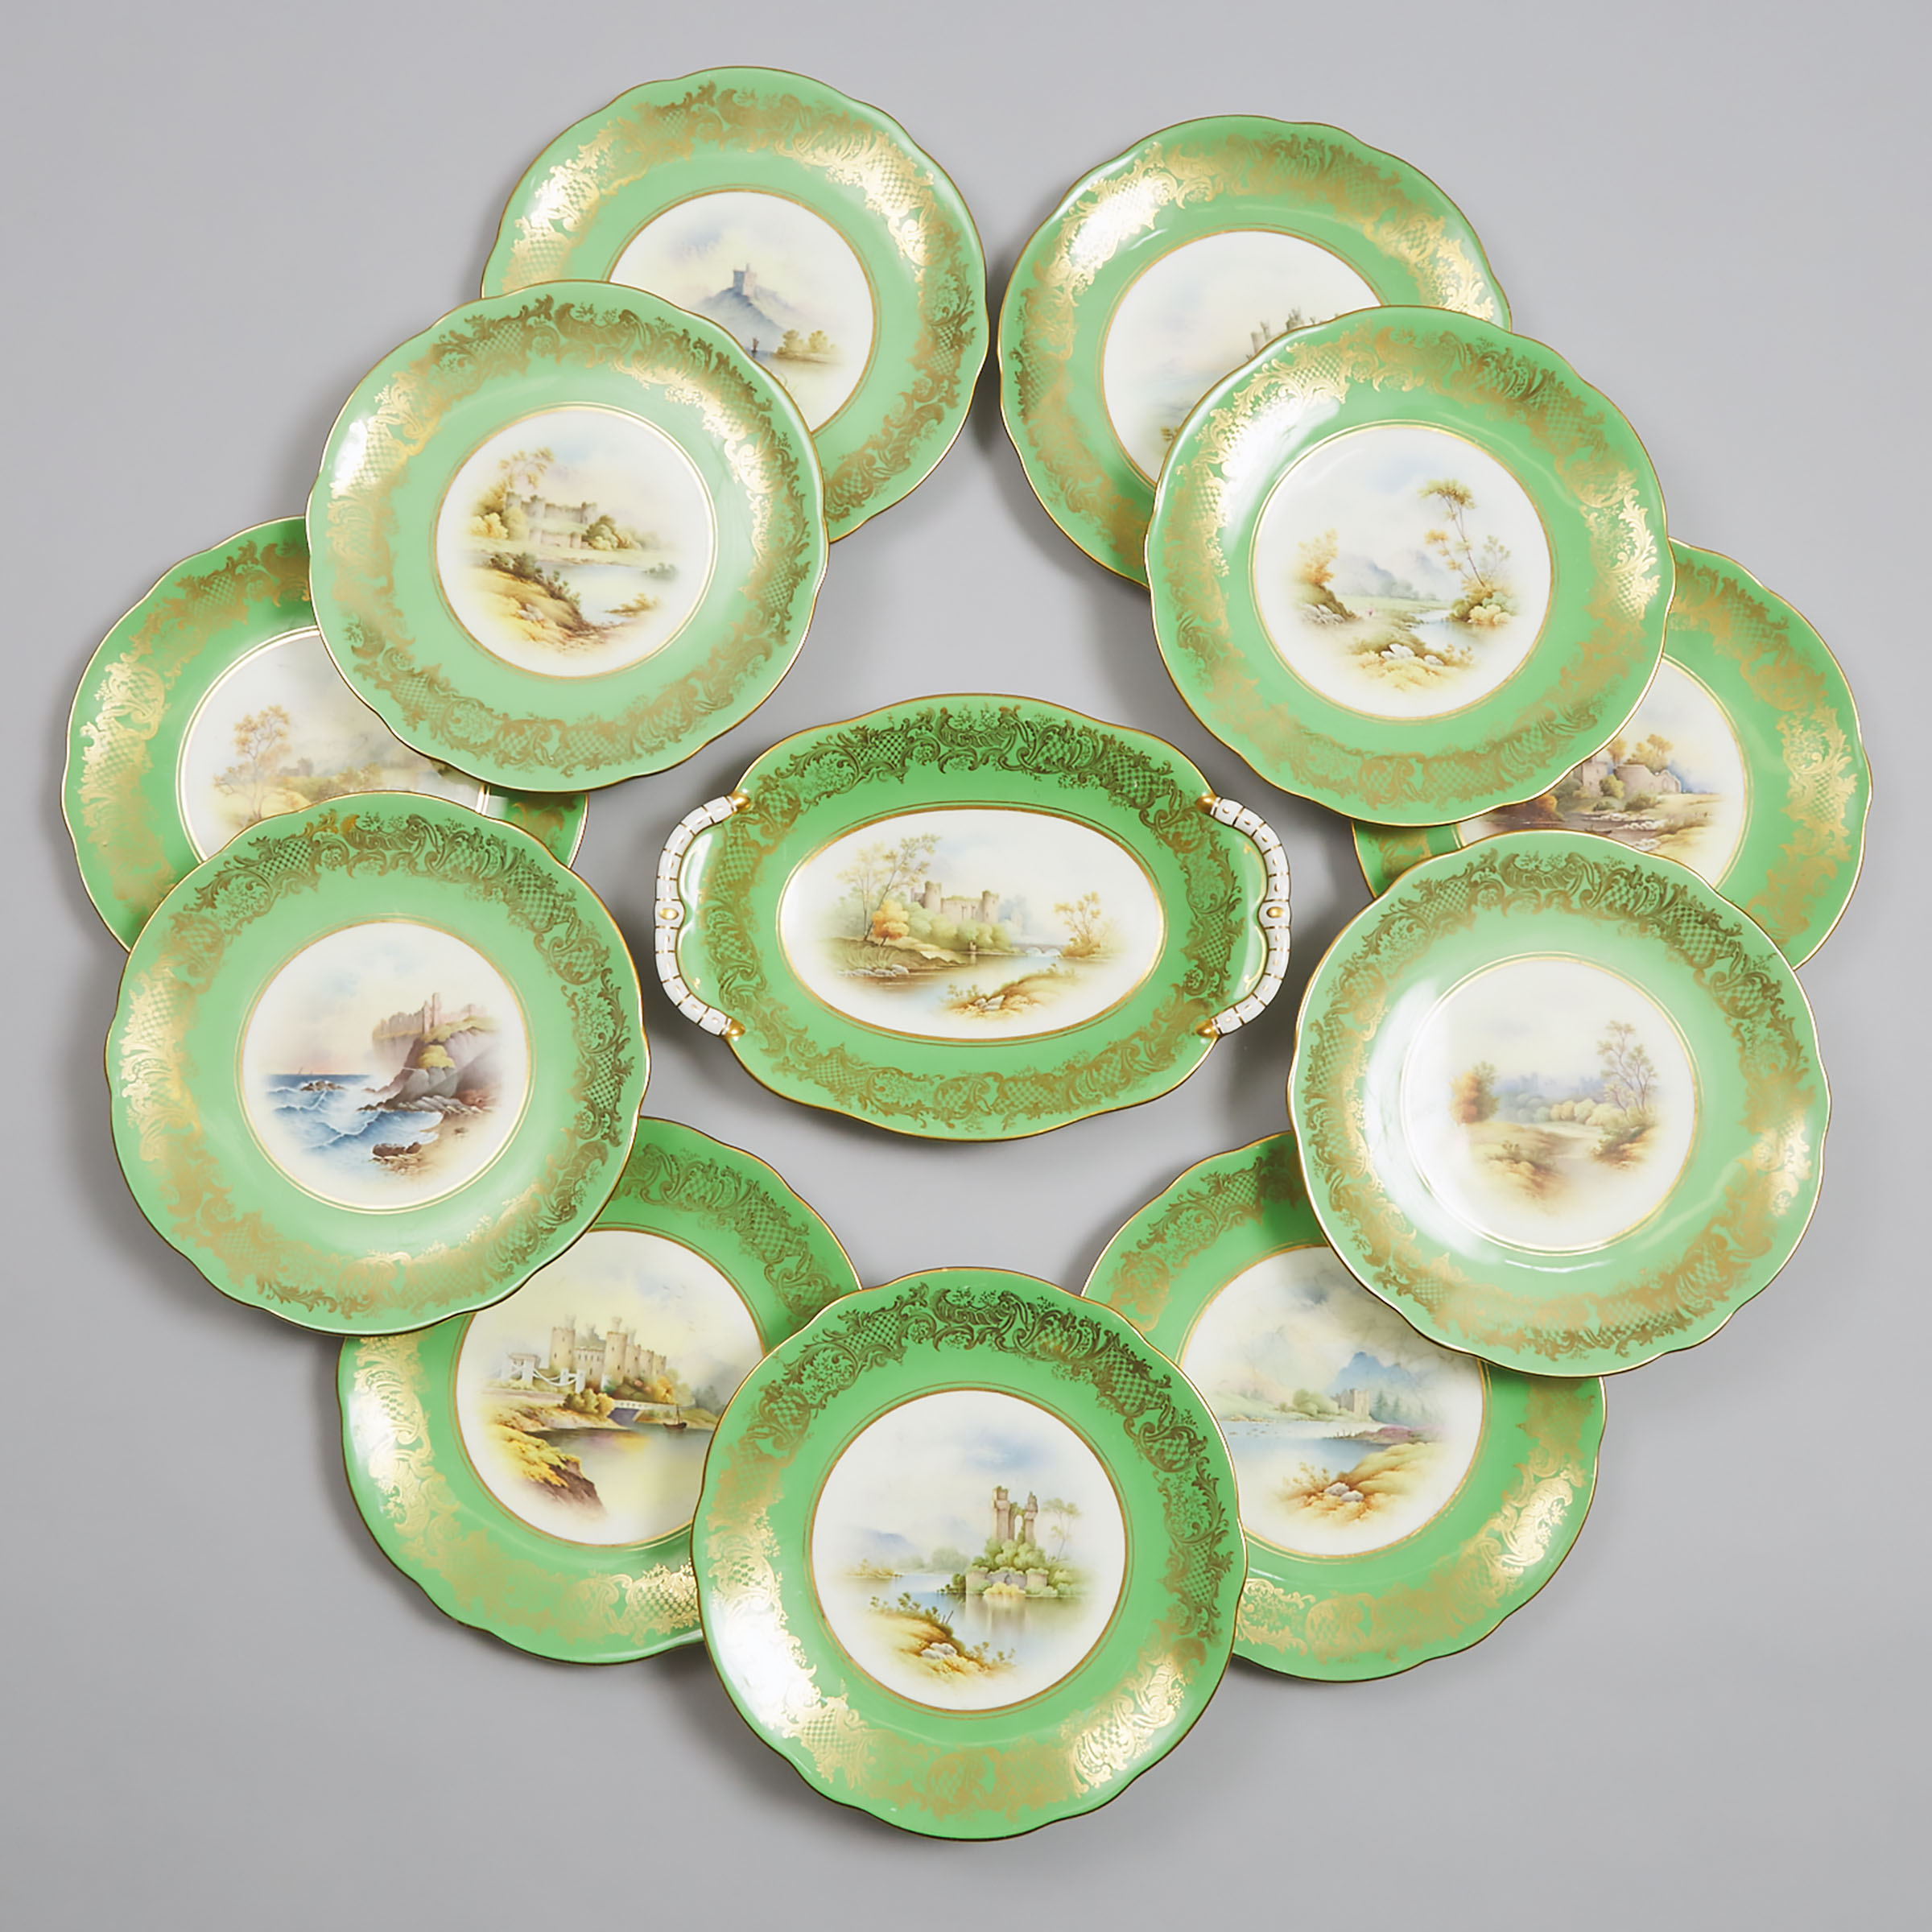 Eleven Coalport Apple Green Ground Topographical Dessert Plates and a Serving Dish, Percy Simpson, early 20th century